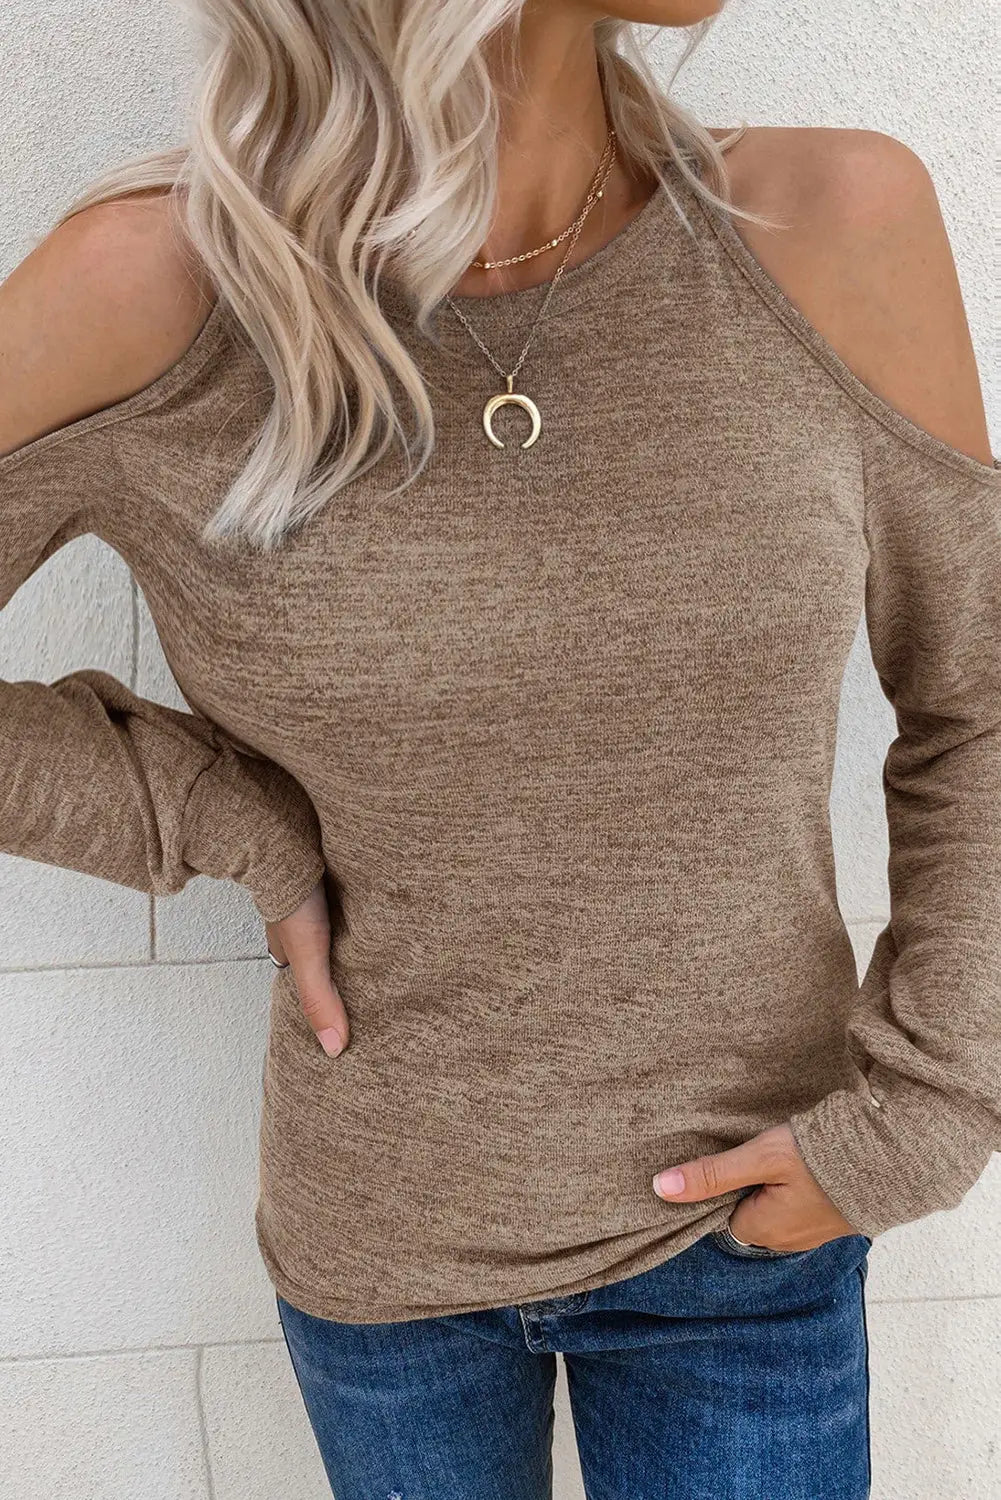 Khaki marble knit cold shoulder long sleeve top - tops